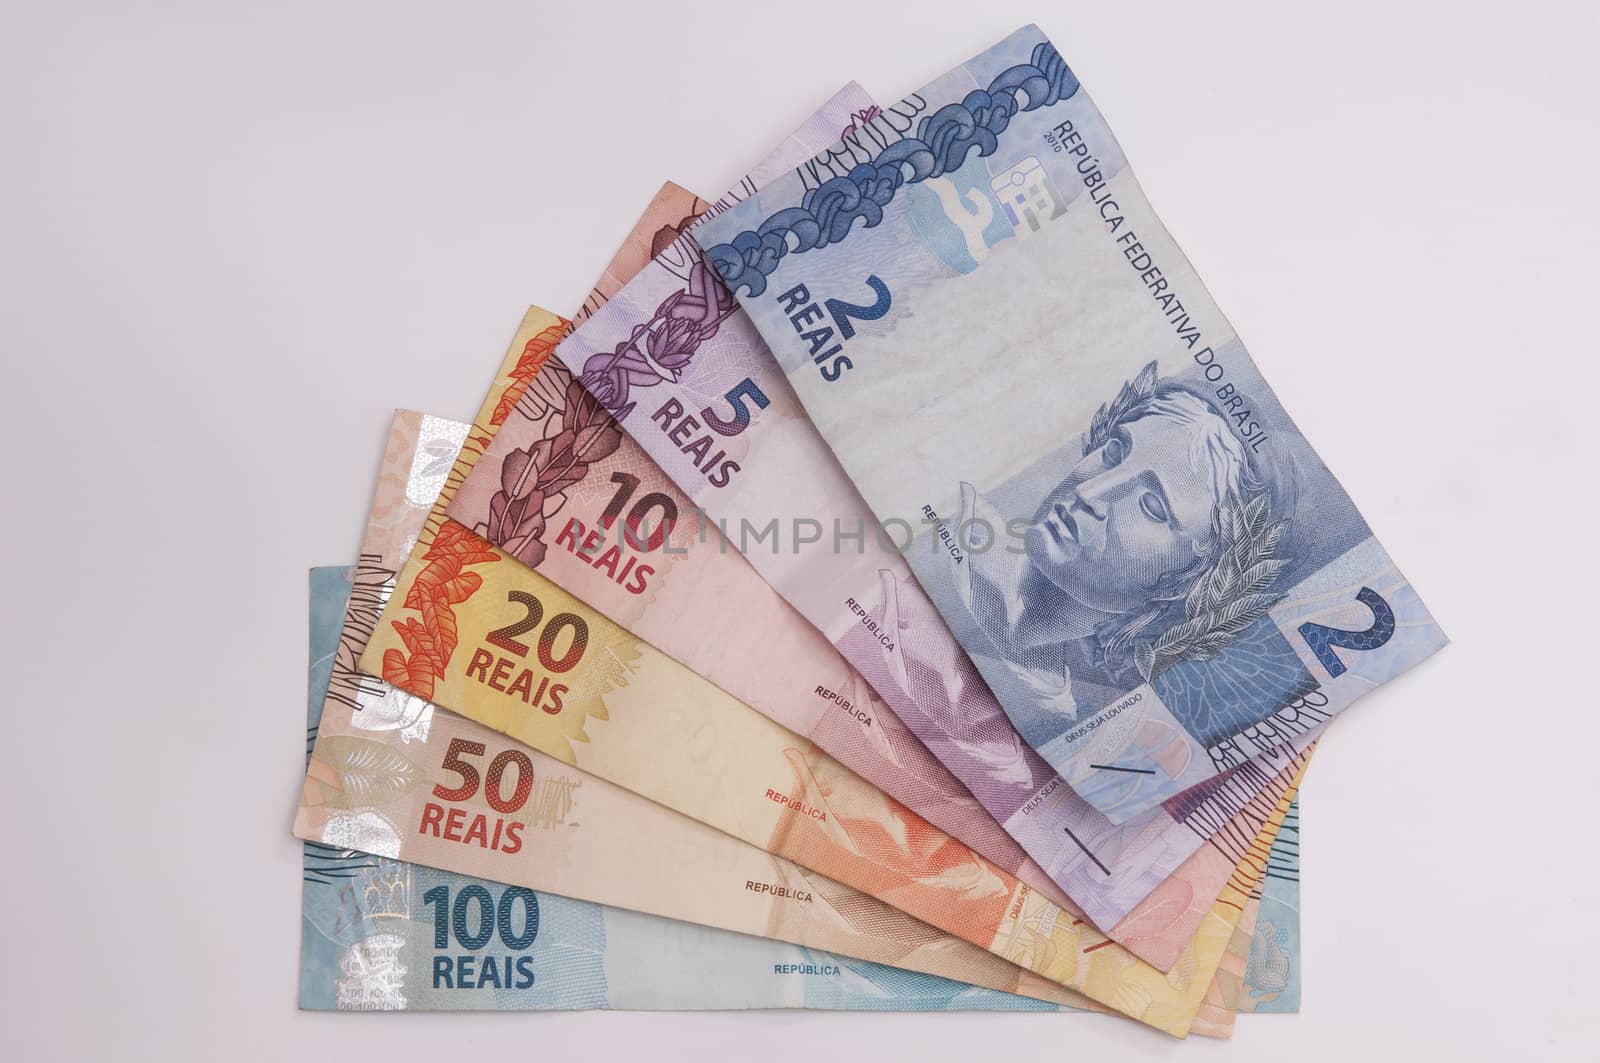 A few bills of brazilian currency (real) on white background